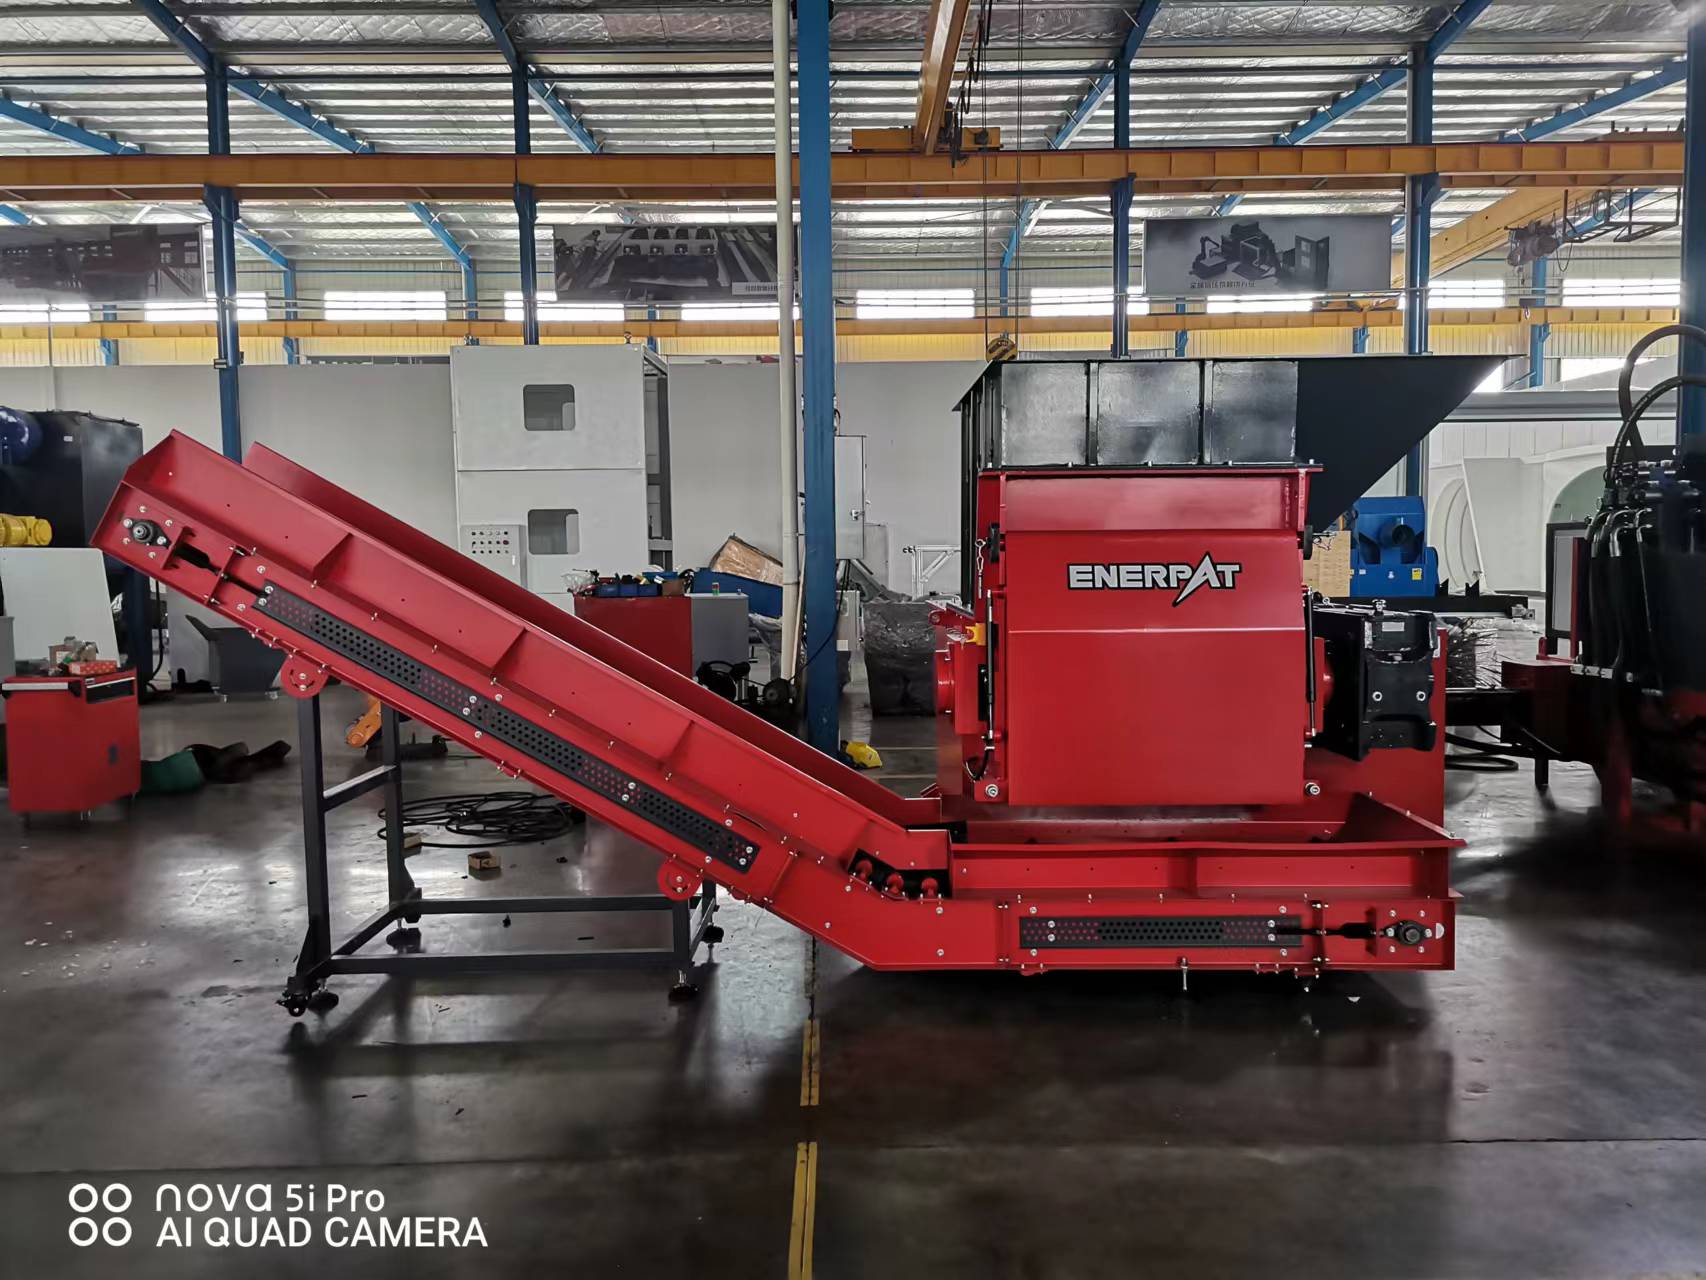 ENERPAT MSA-F1200 Single Shaft Shredder and DC30 Drum Crusher on the way to New Zealand